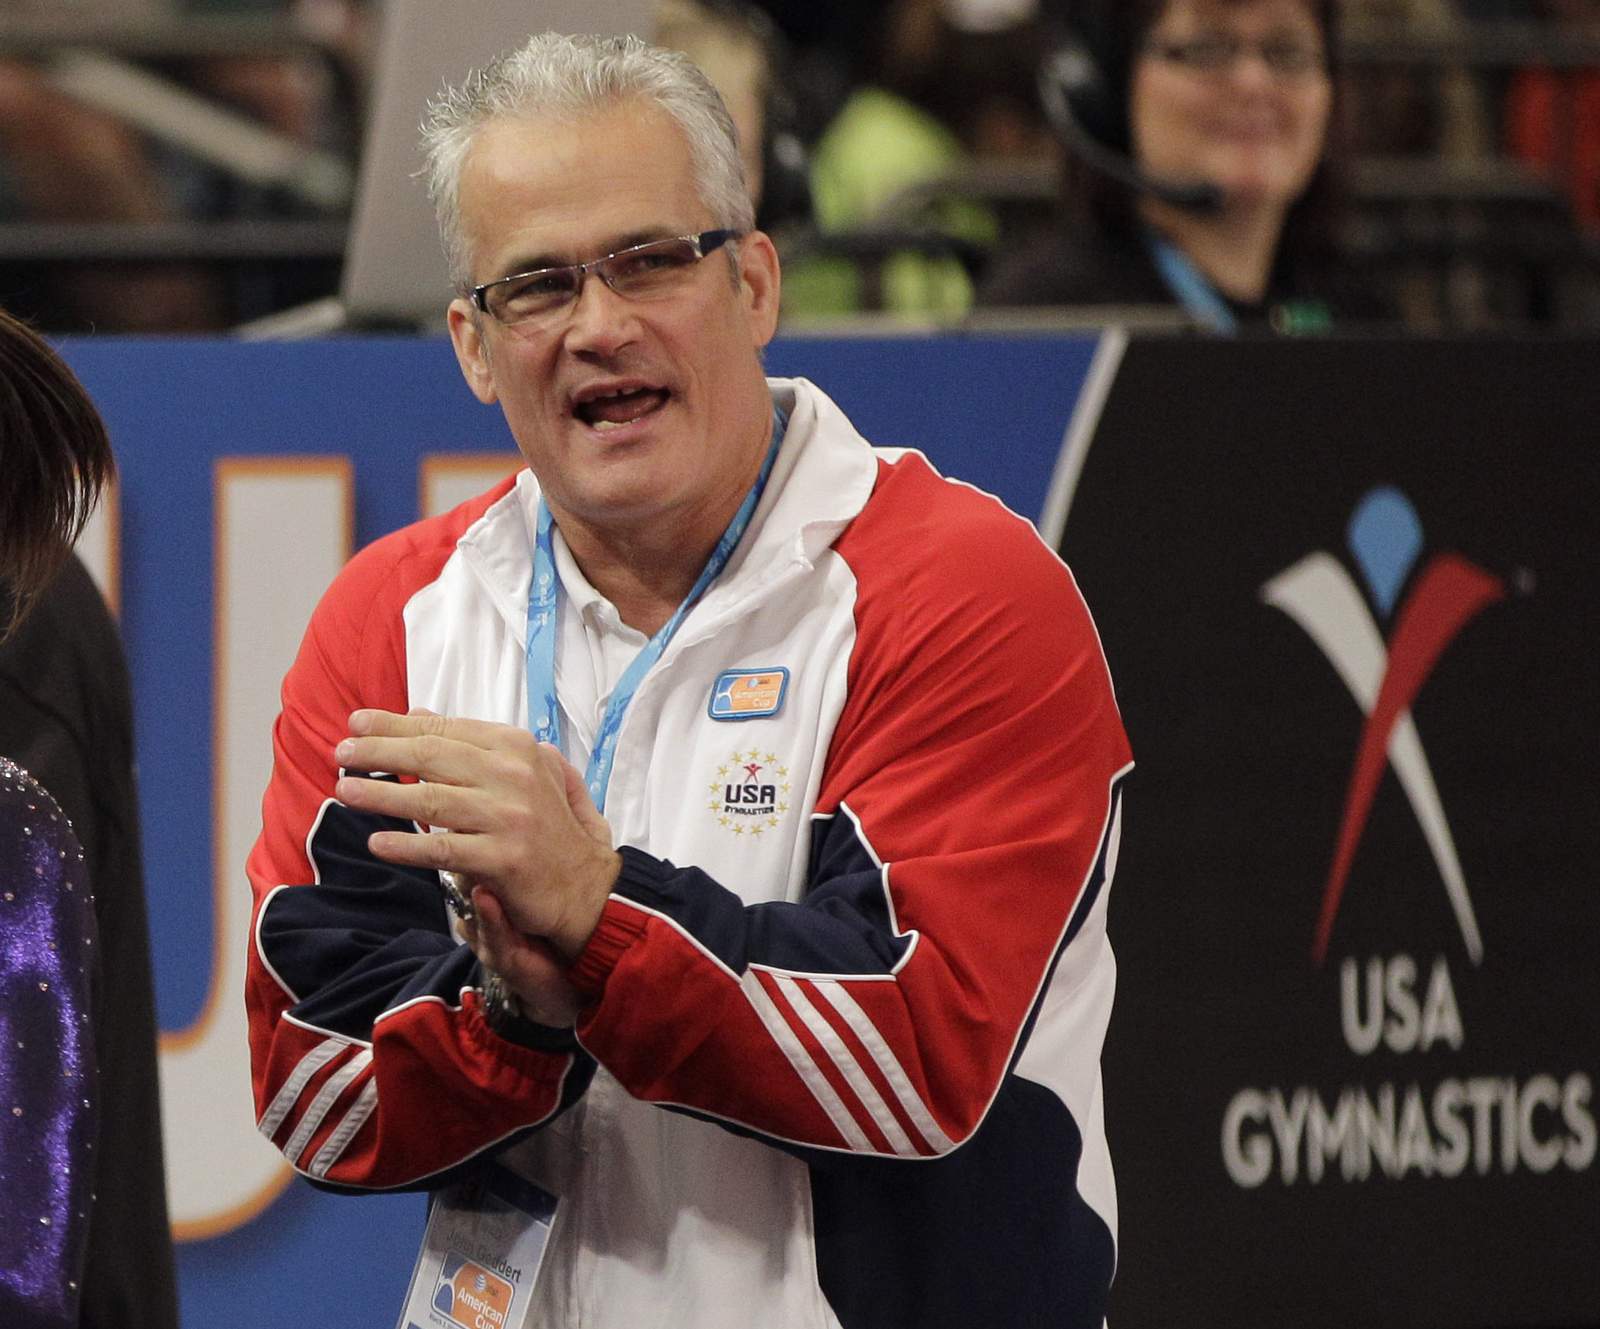 Former U.S. gymnastics coach dies by suicide after being charged for alleged sex crimes in Michigan